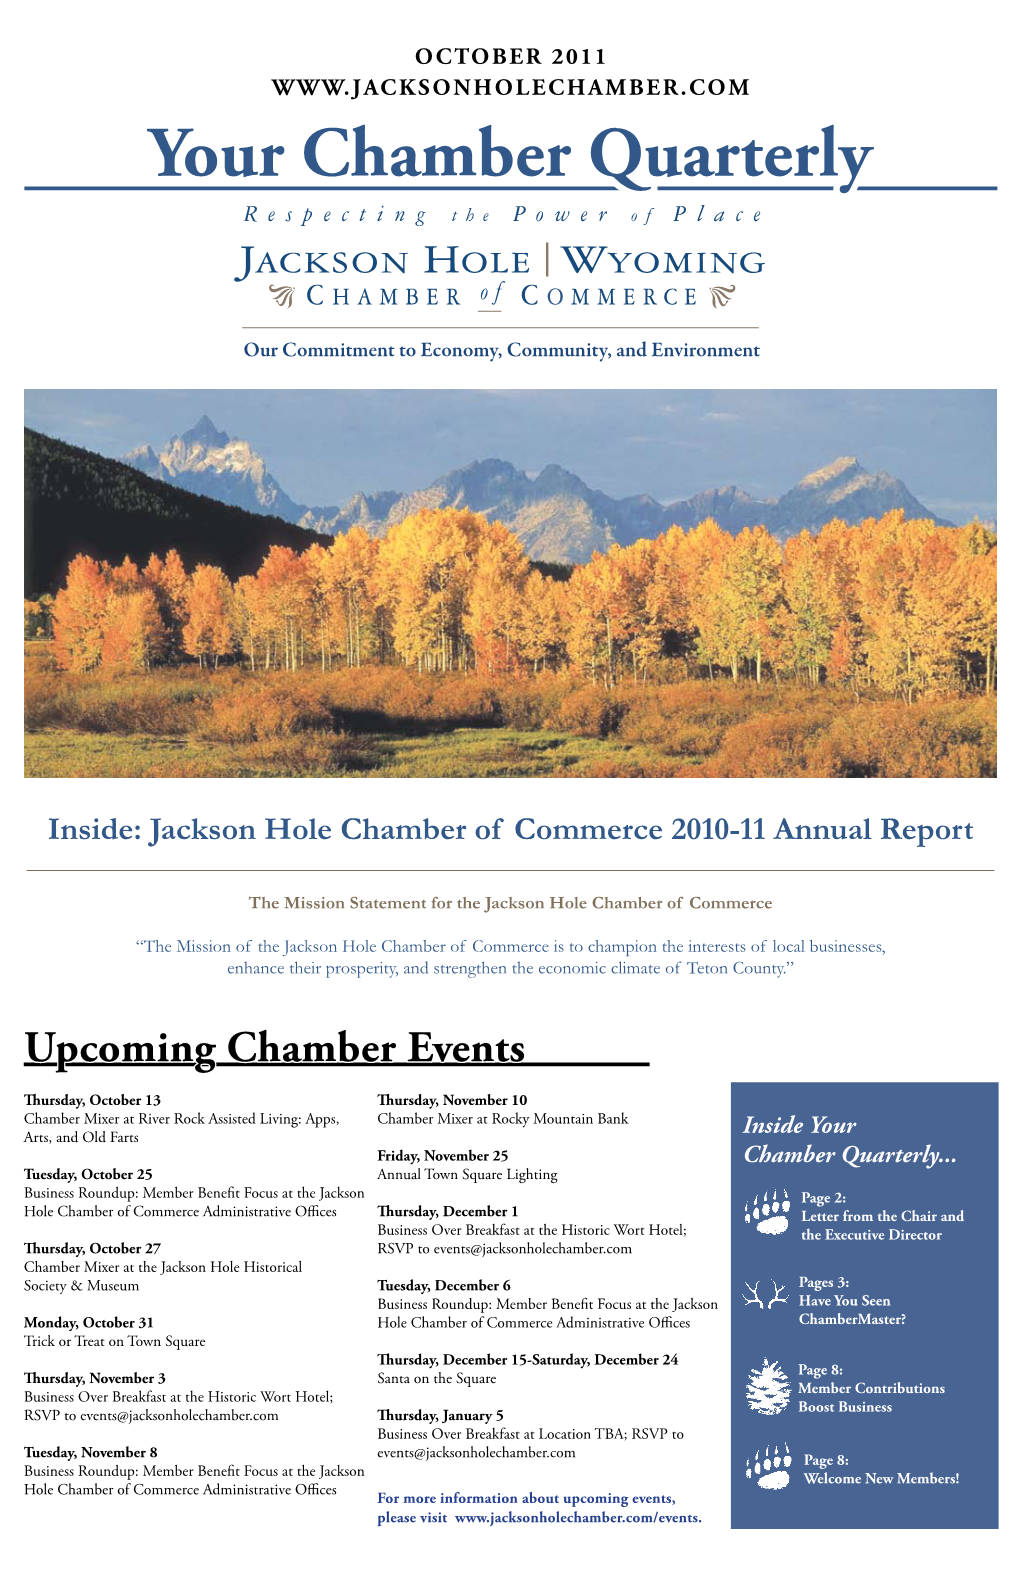 Your Chamber Quarterly